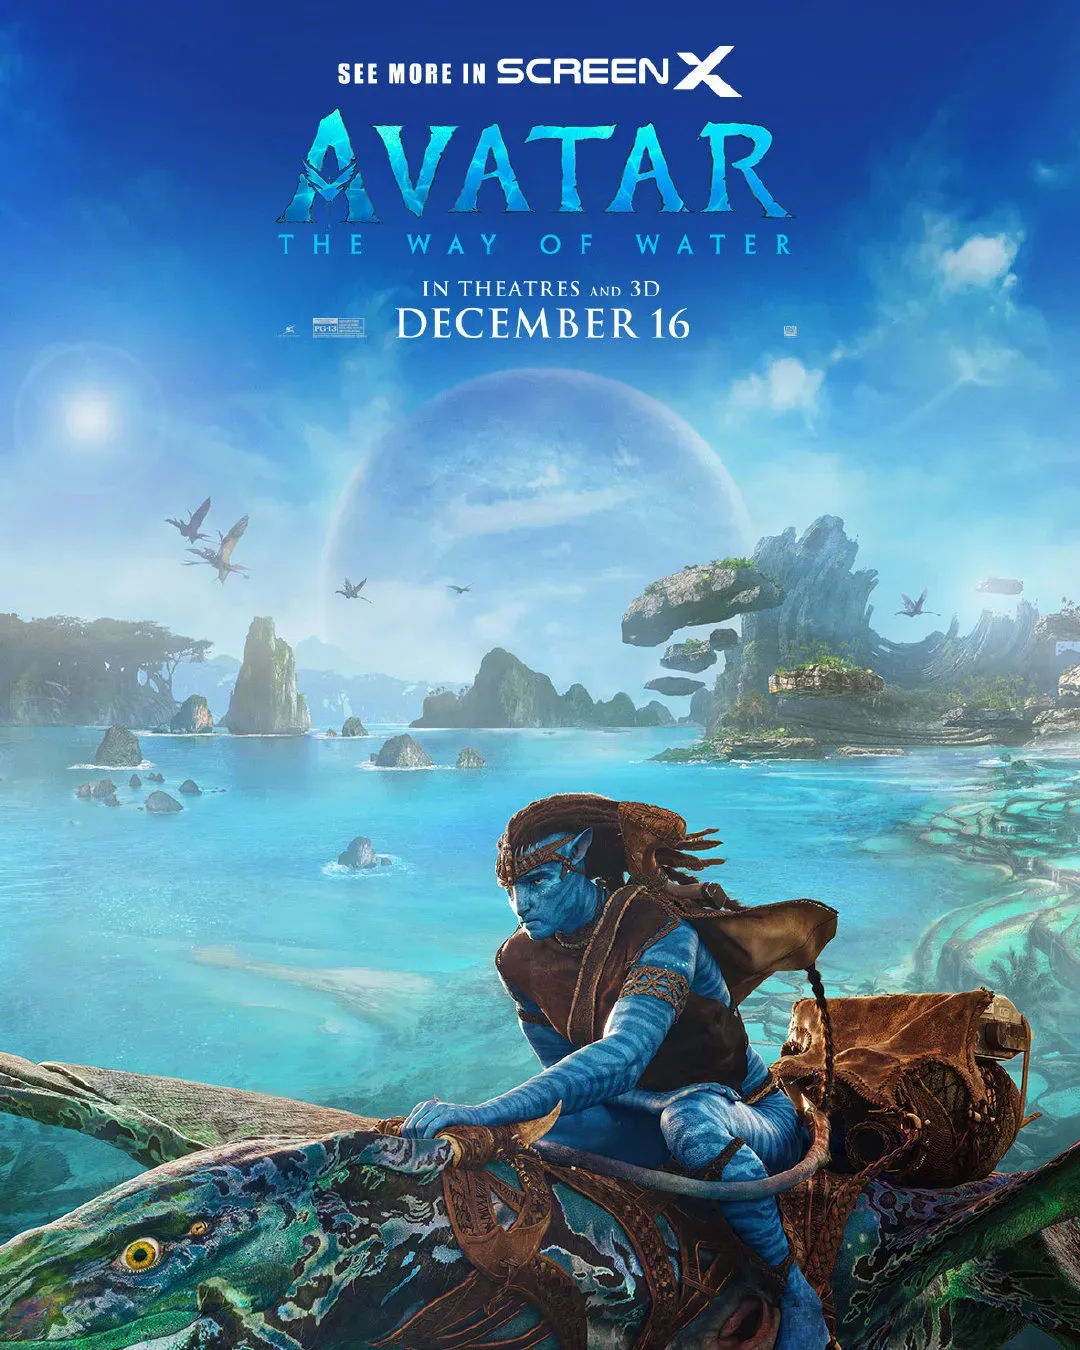 'Avatar: The Way of Water' releases several new format posters: real 3D, 4DX, ScreenX | FMV6